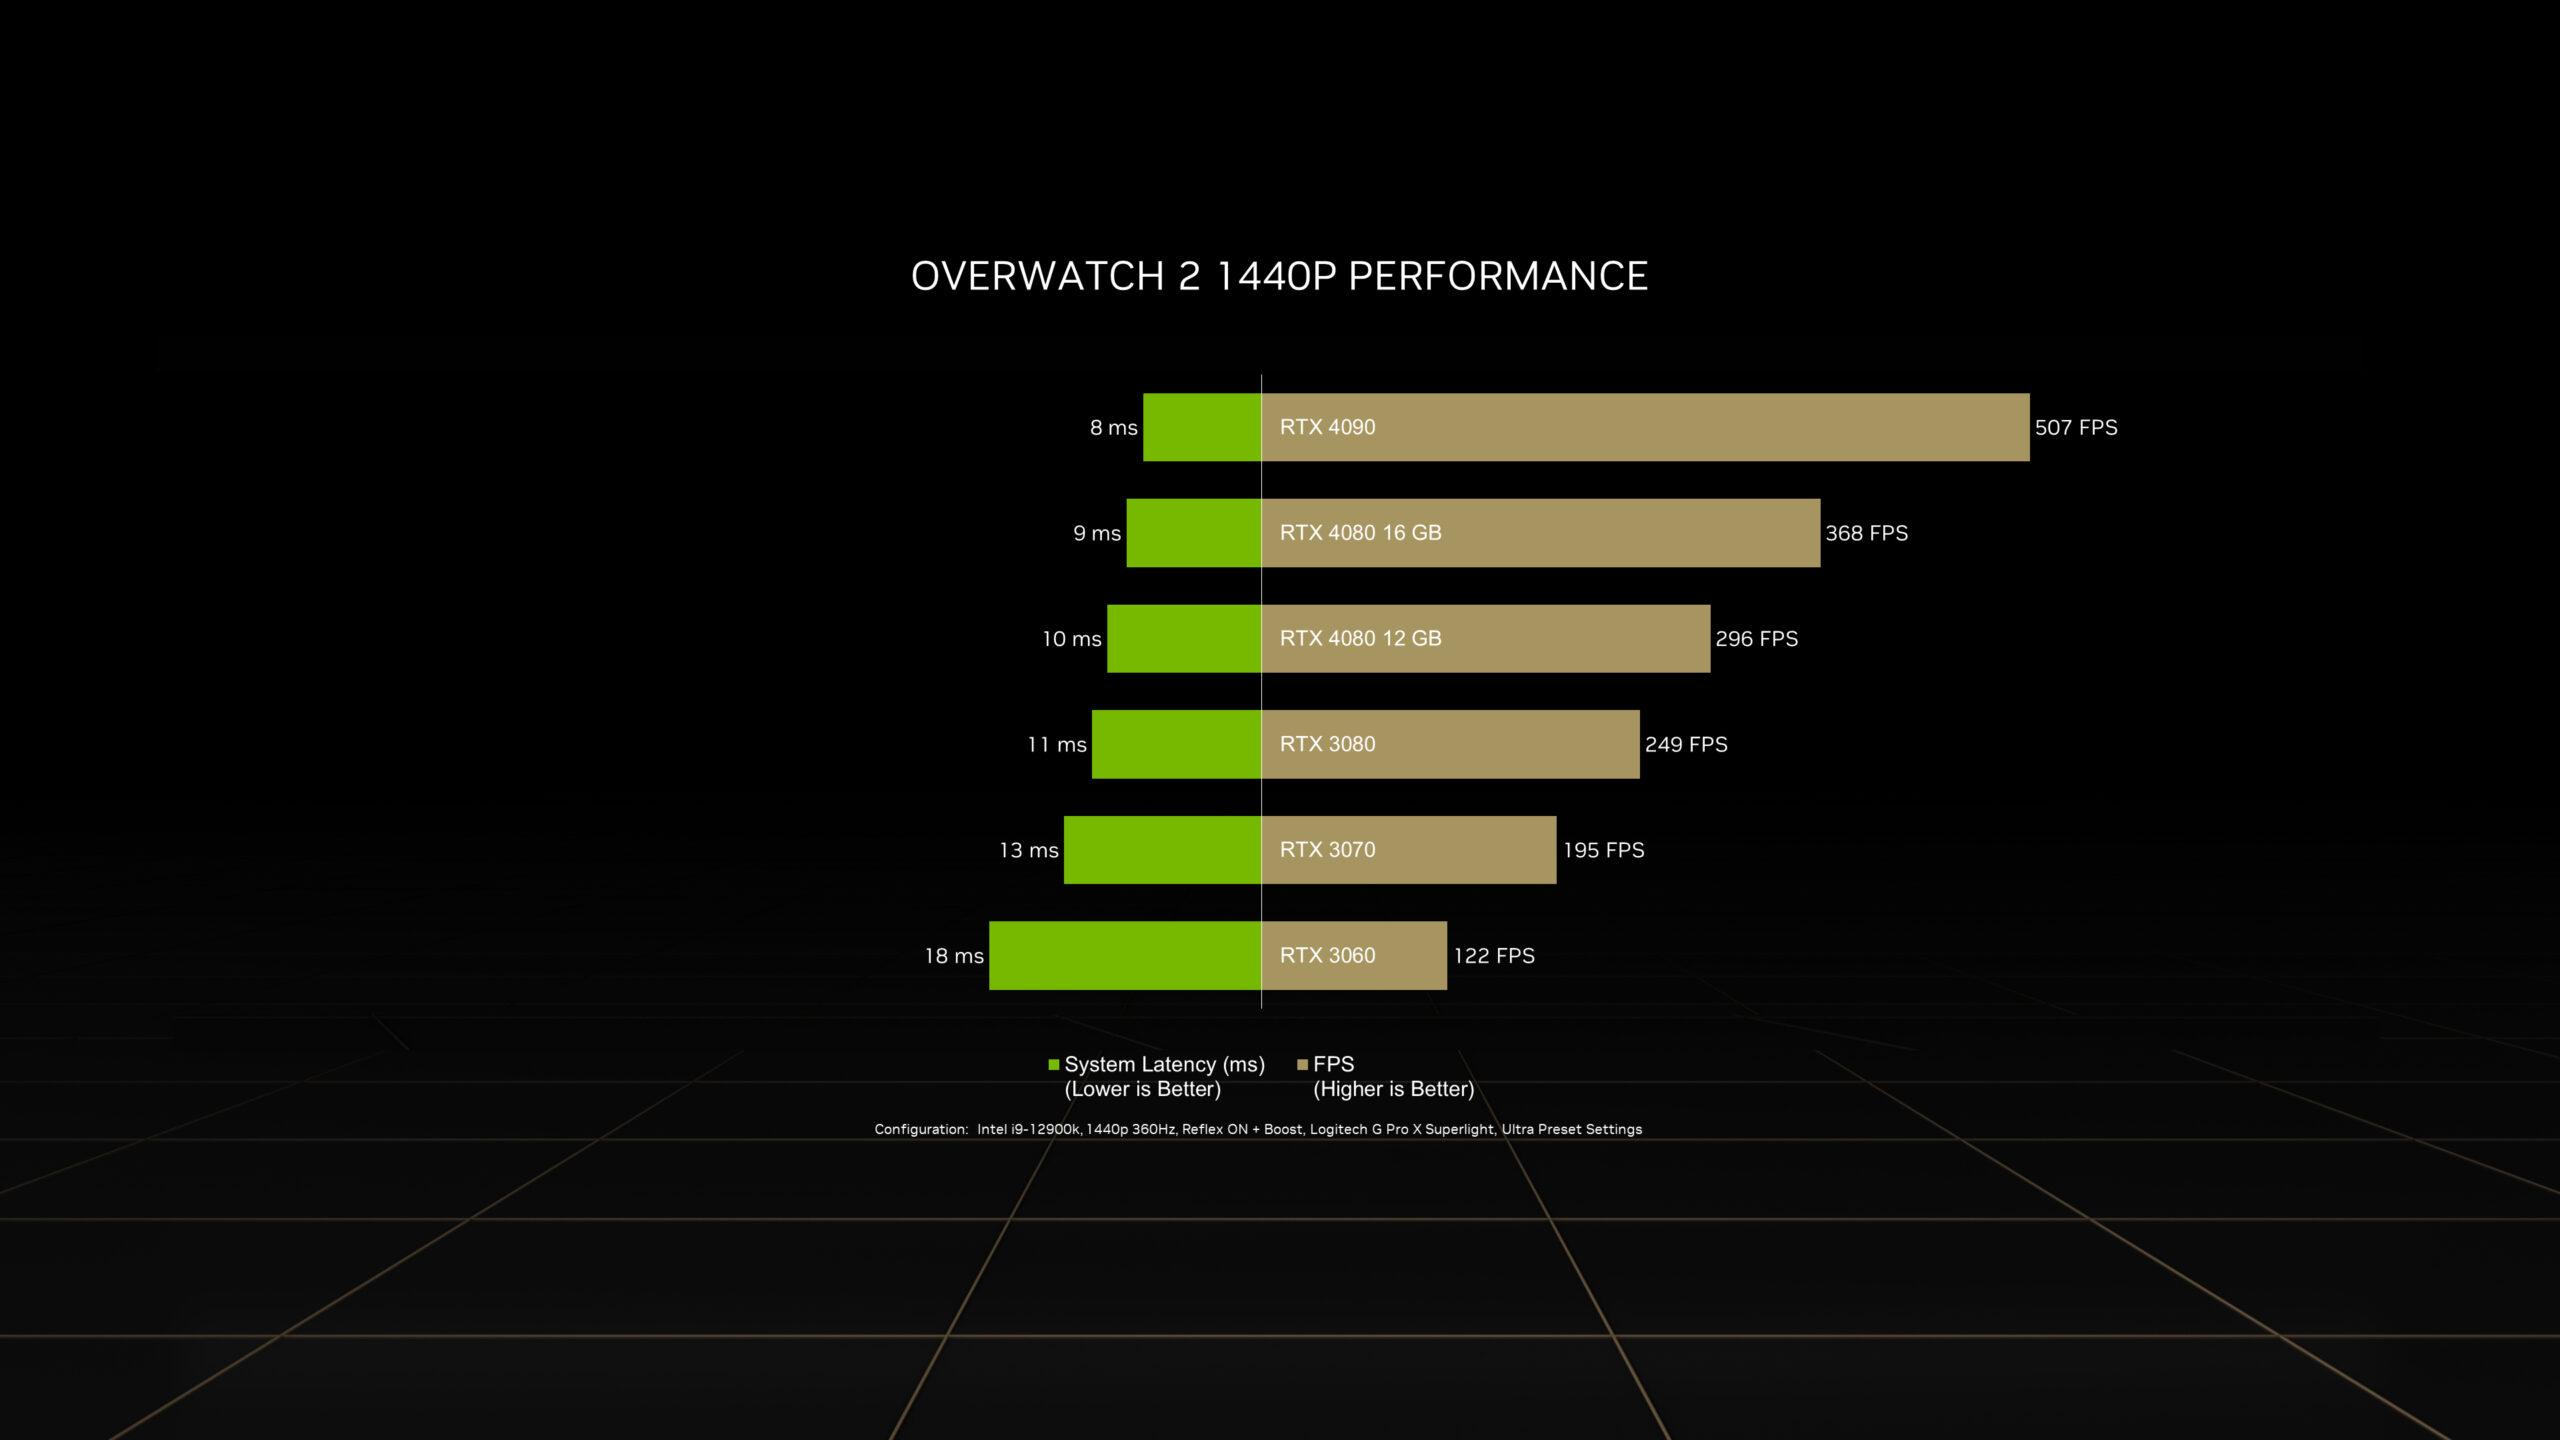 Overwatch 2 runs at over 500 FPS on an RTX 4090 with 1440p resolution